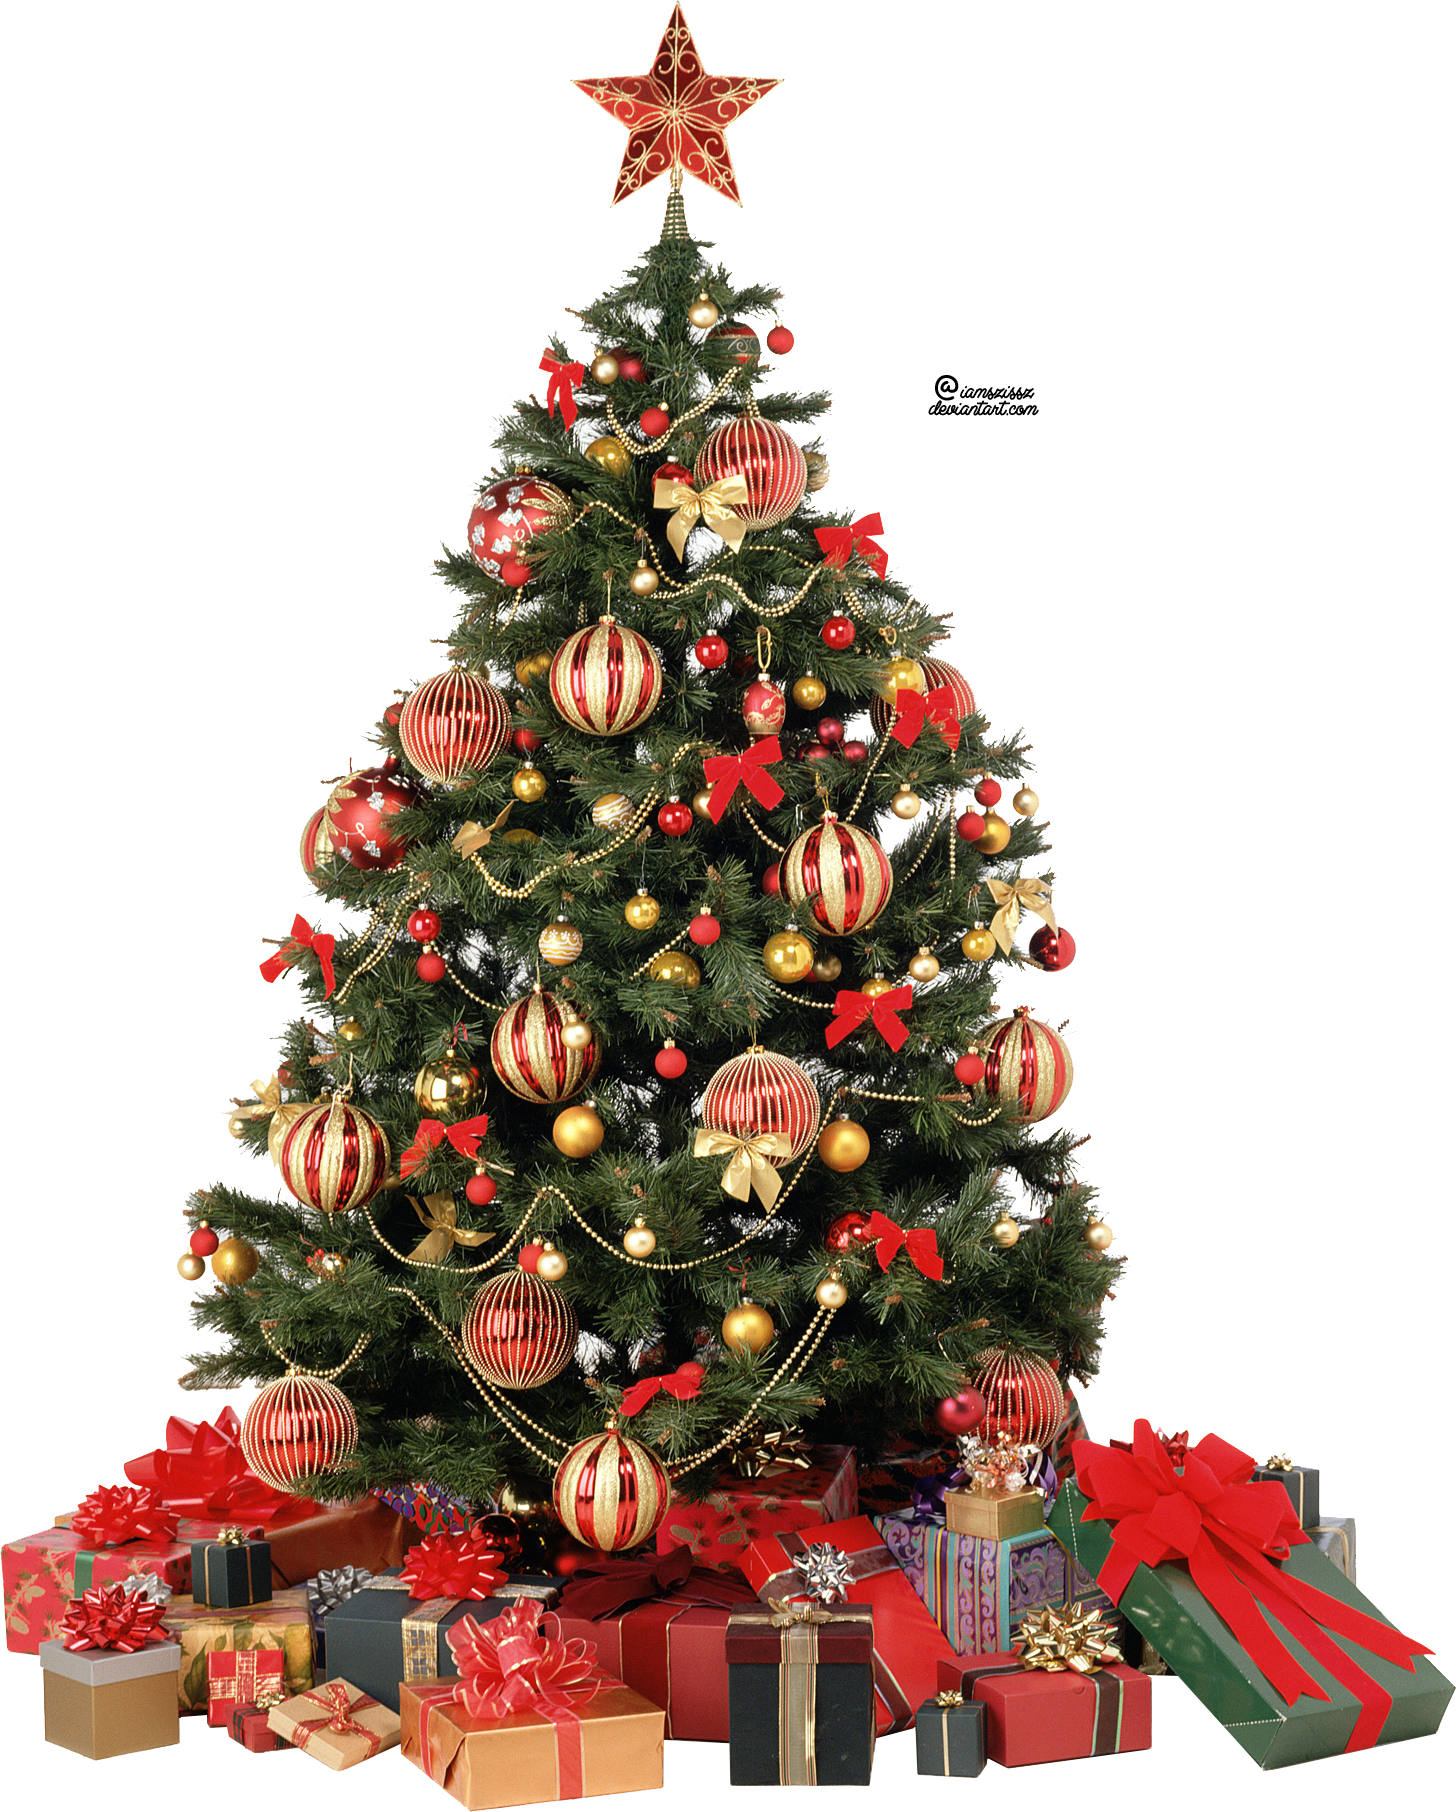 Png File Name: Christmas Tree Hdpng.com  - Christmas Tree, Transparent background PNG HD thumbnail